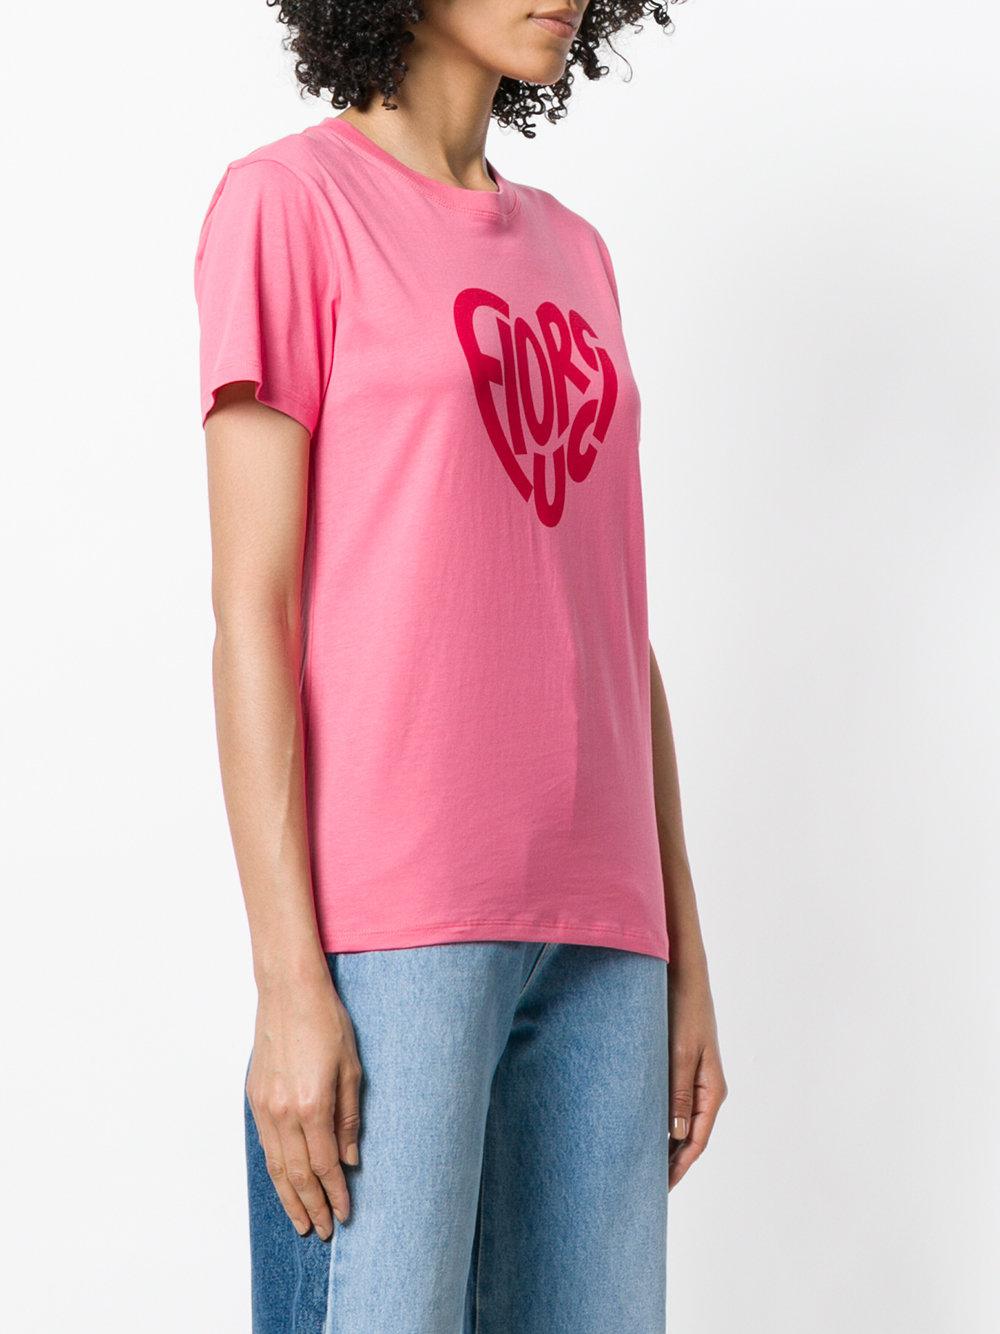 kom over Stoop endnu engang Fiorucci Heart Logo Print T-shirt in Pink | Lyst